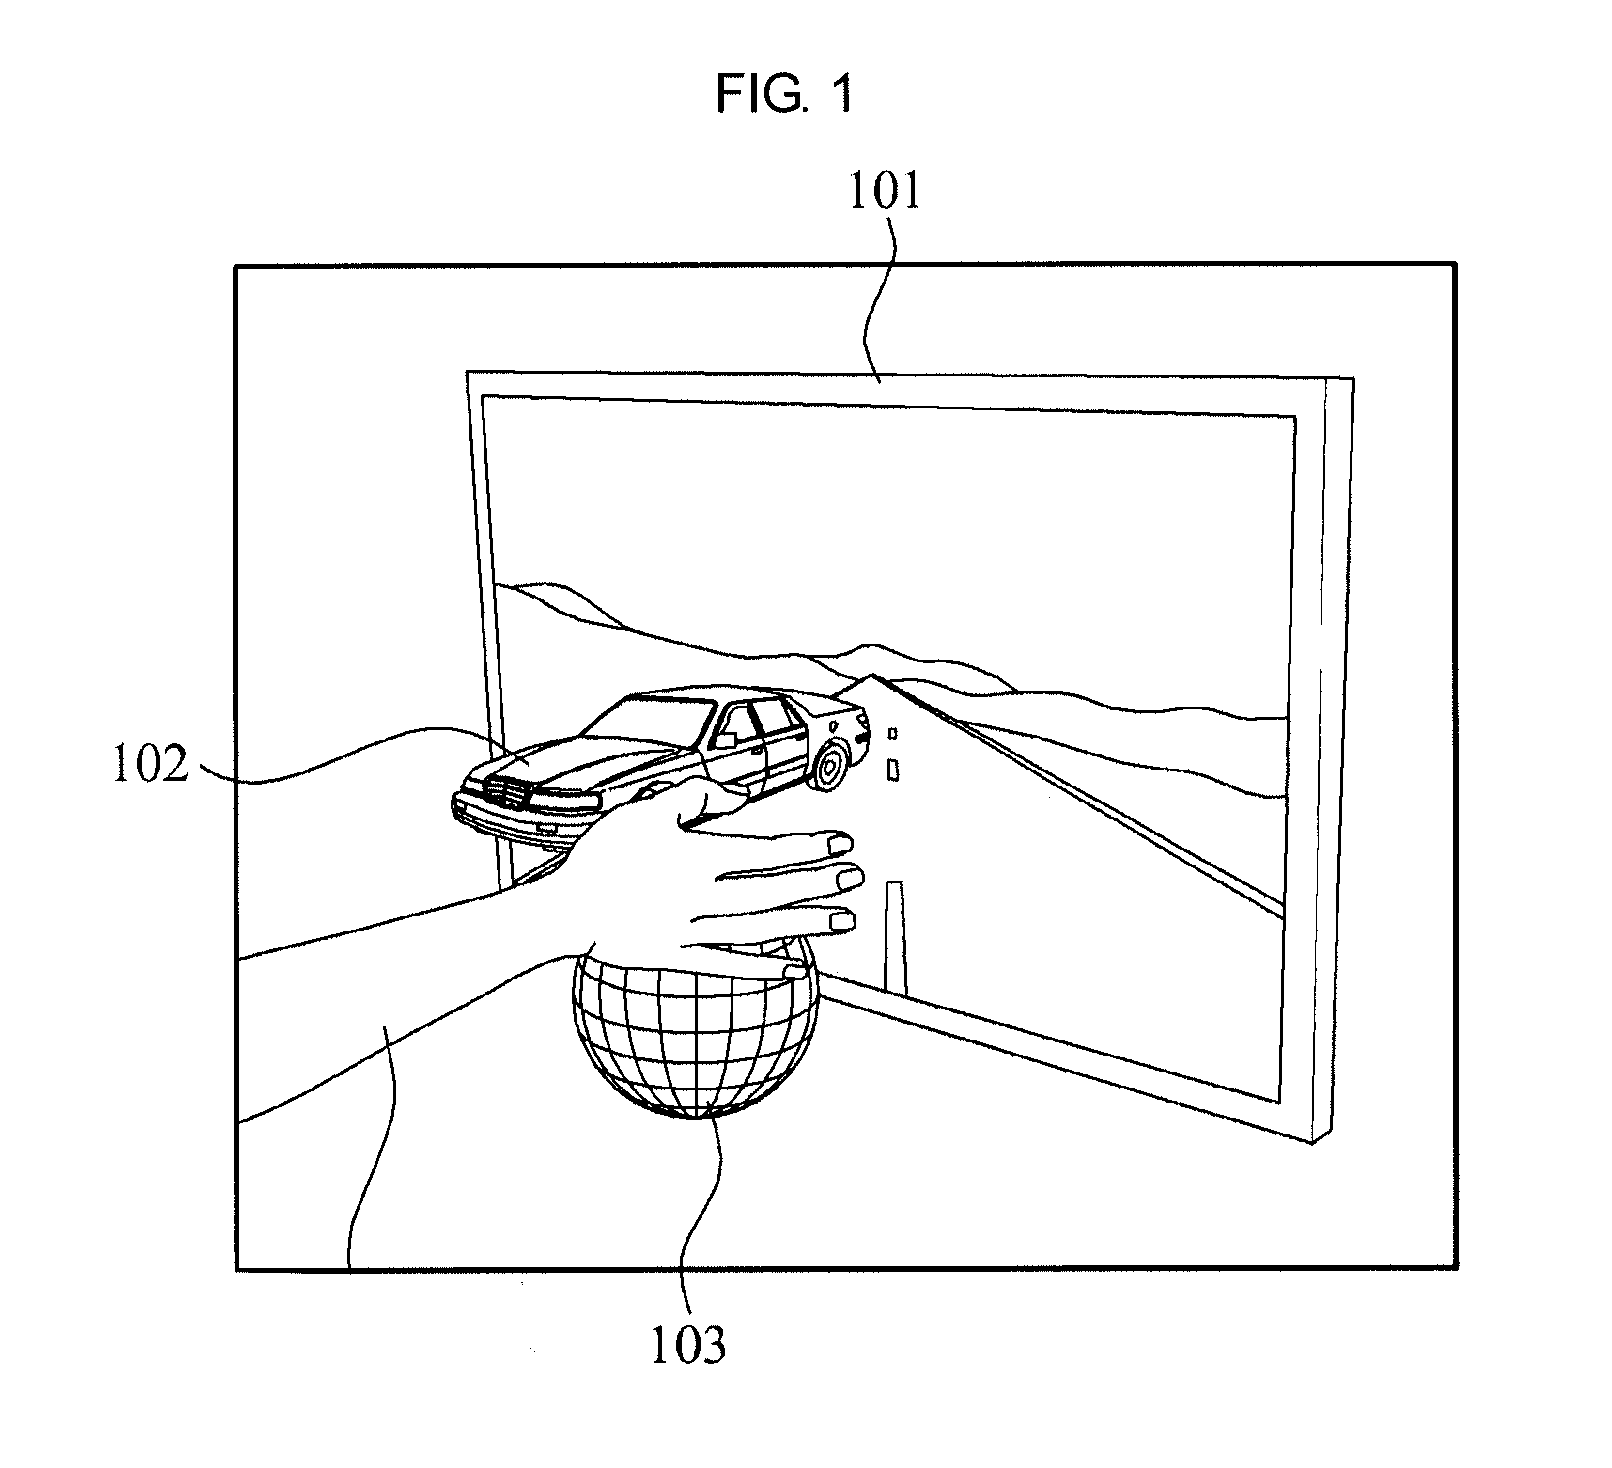 Apparatus and method for controlling 3D image